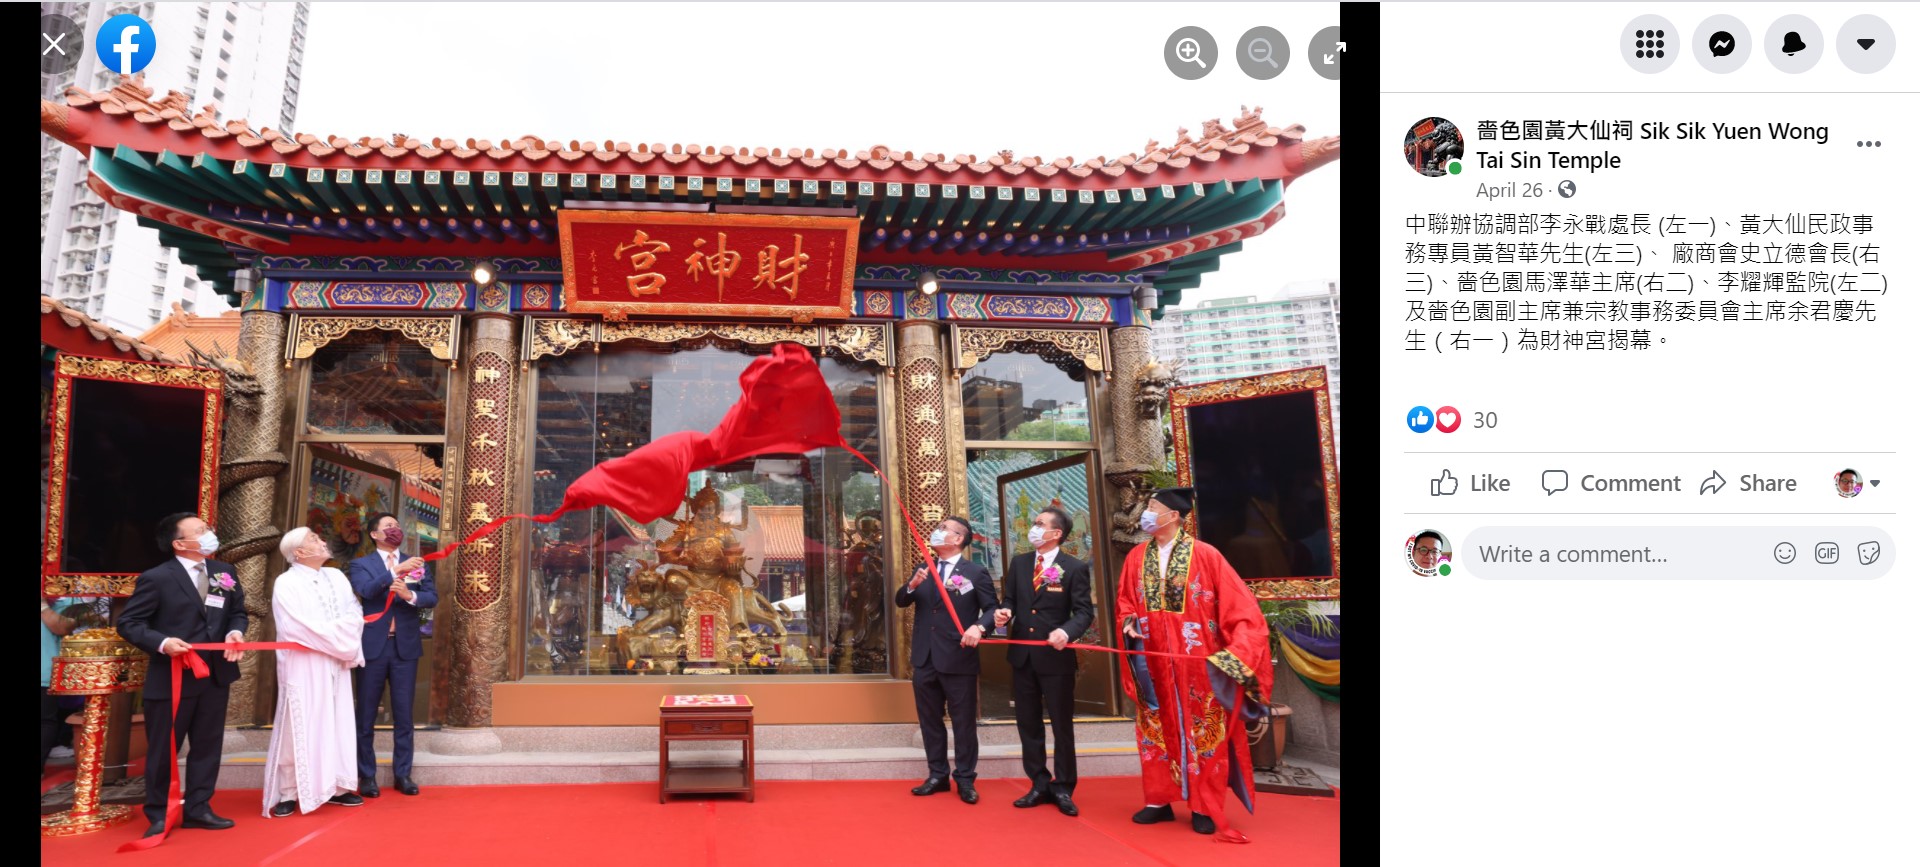 Wong Tai Sin Temple's FaceBook post shows the opening of the God of Wealth Hall.